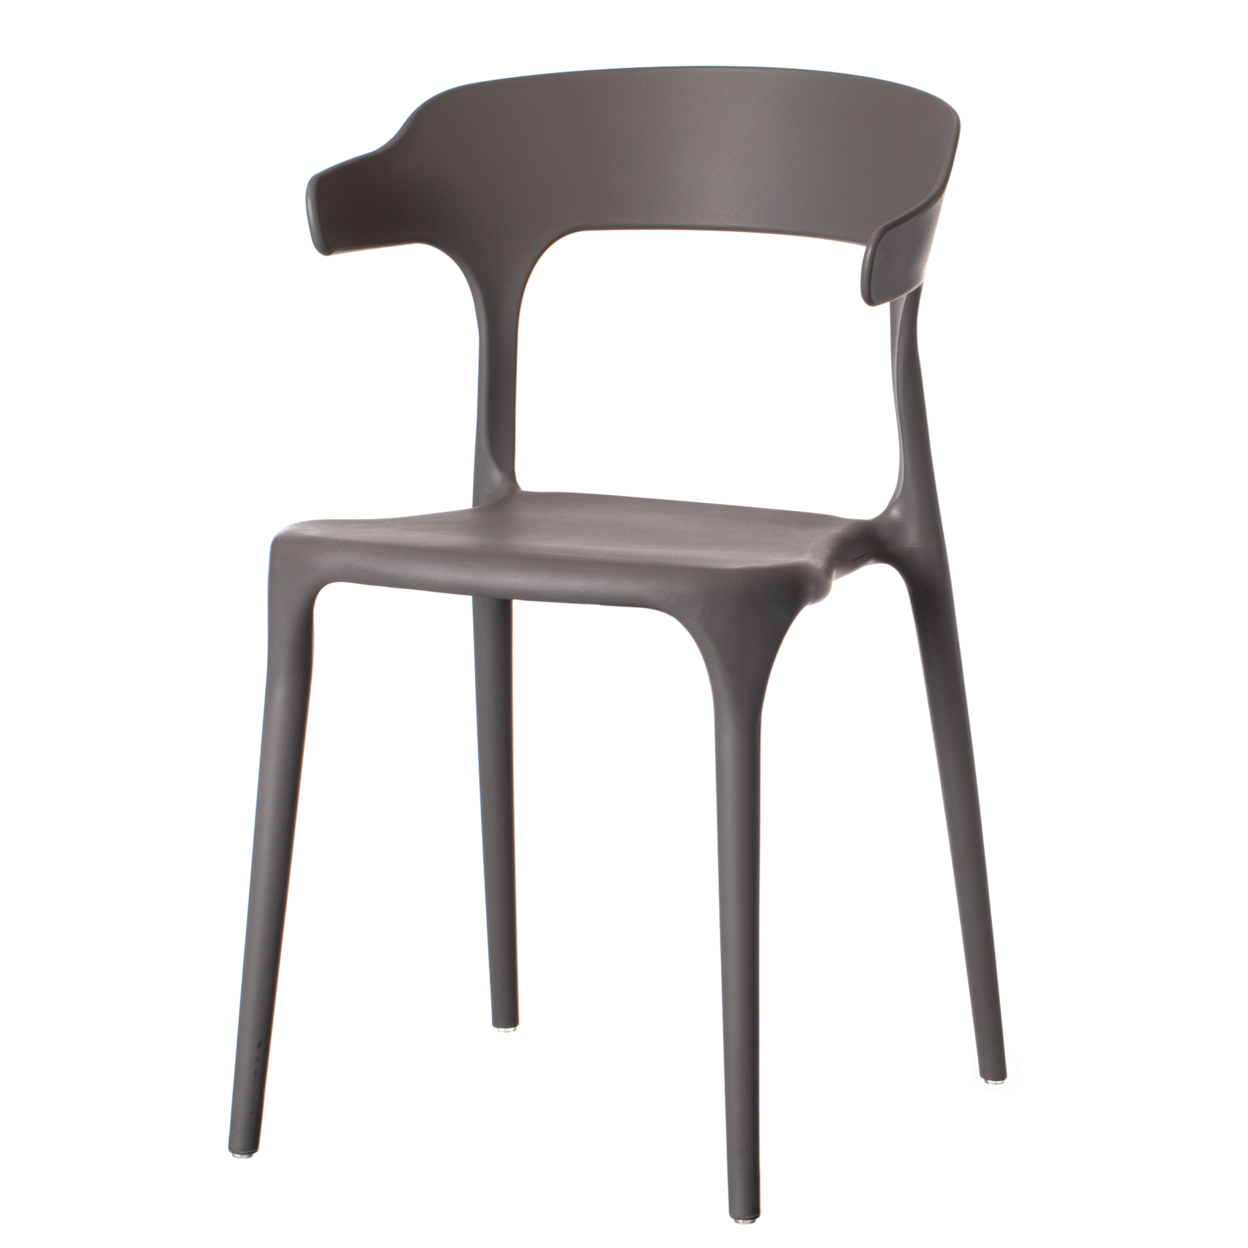 Modern Plastic Outdoor Dining Chair With Open U Shaped Back - Single Gray